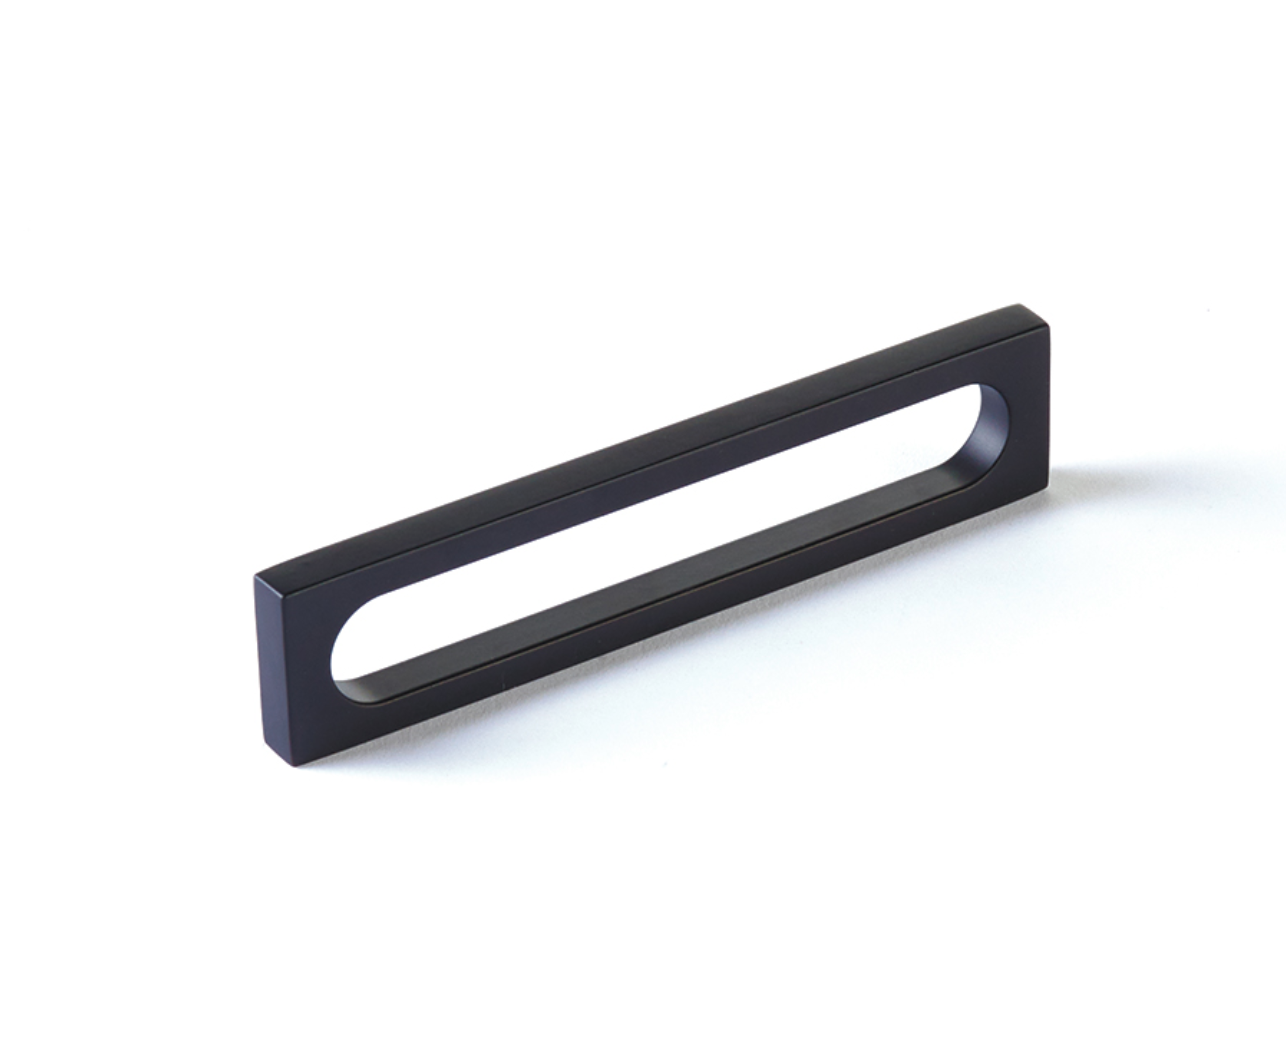 Matte Black "Loop" Square Drawer Pulls and Cabinet Knobs - Industry Hardware